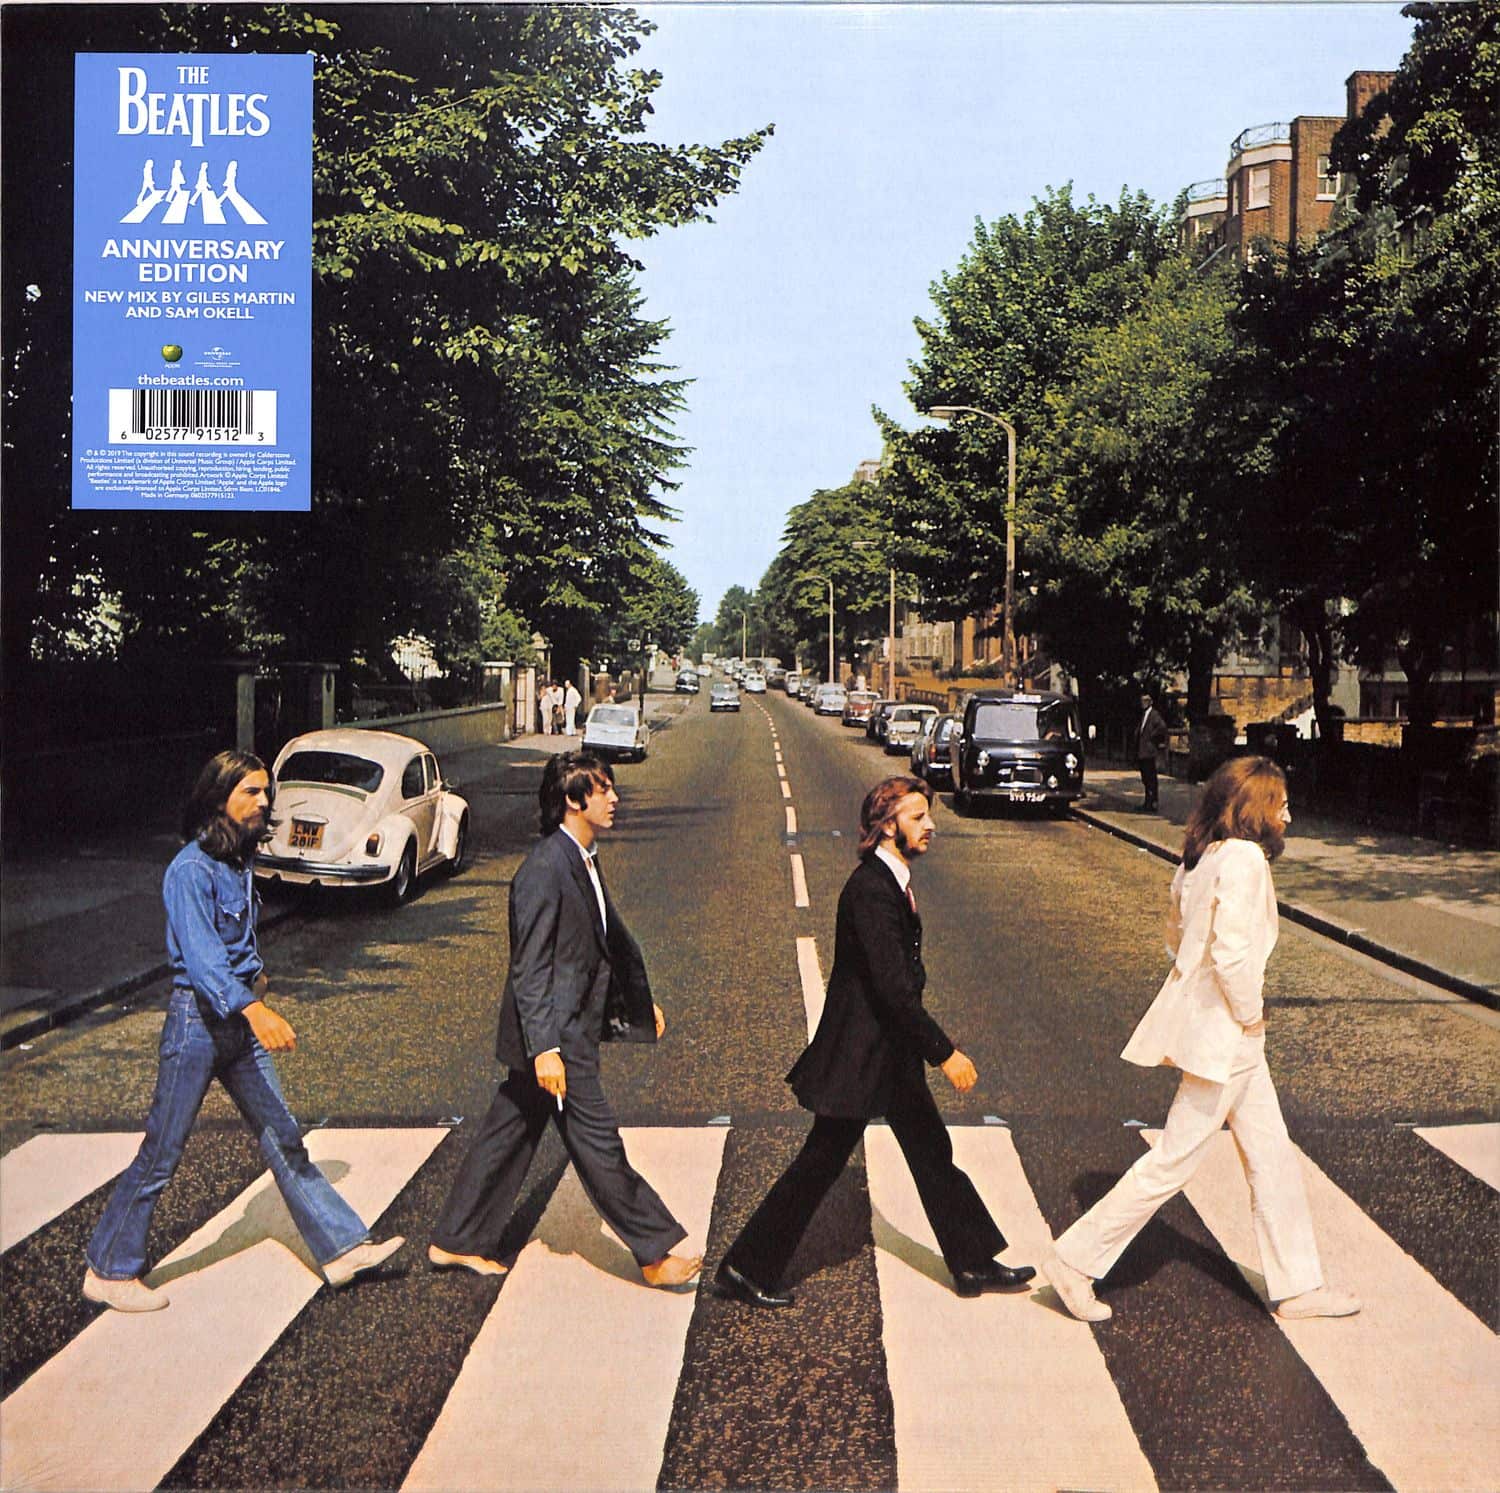 The Beatles - ABBEY ROAD - 50TH ANNIVERSARY 